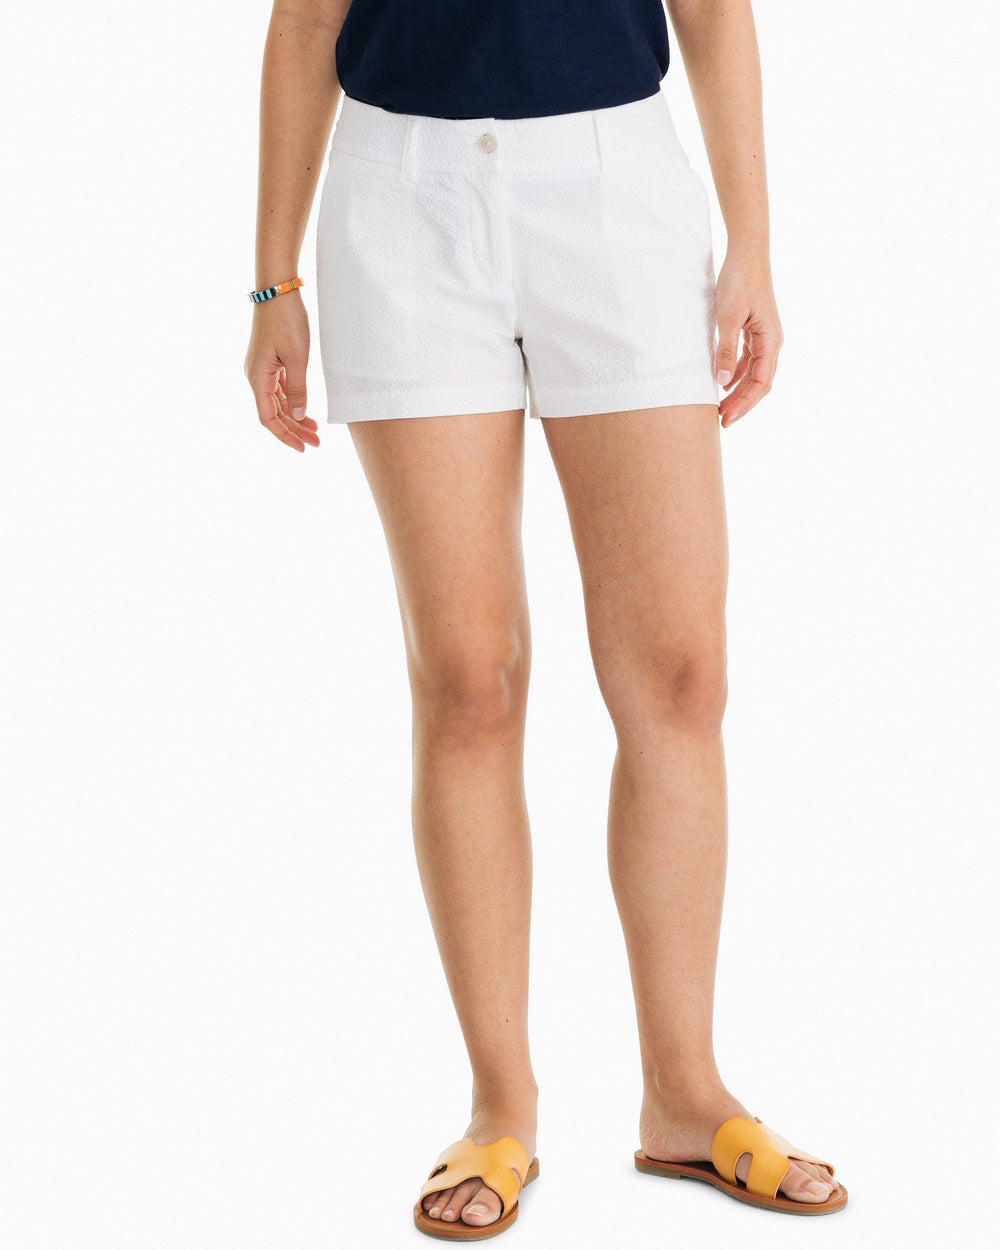 Classic White - The folded view of the Women's White Leah 3" Seersucker Short by Southern Tide